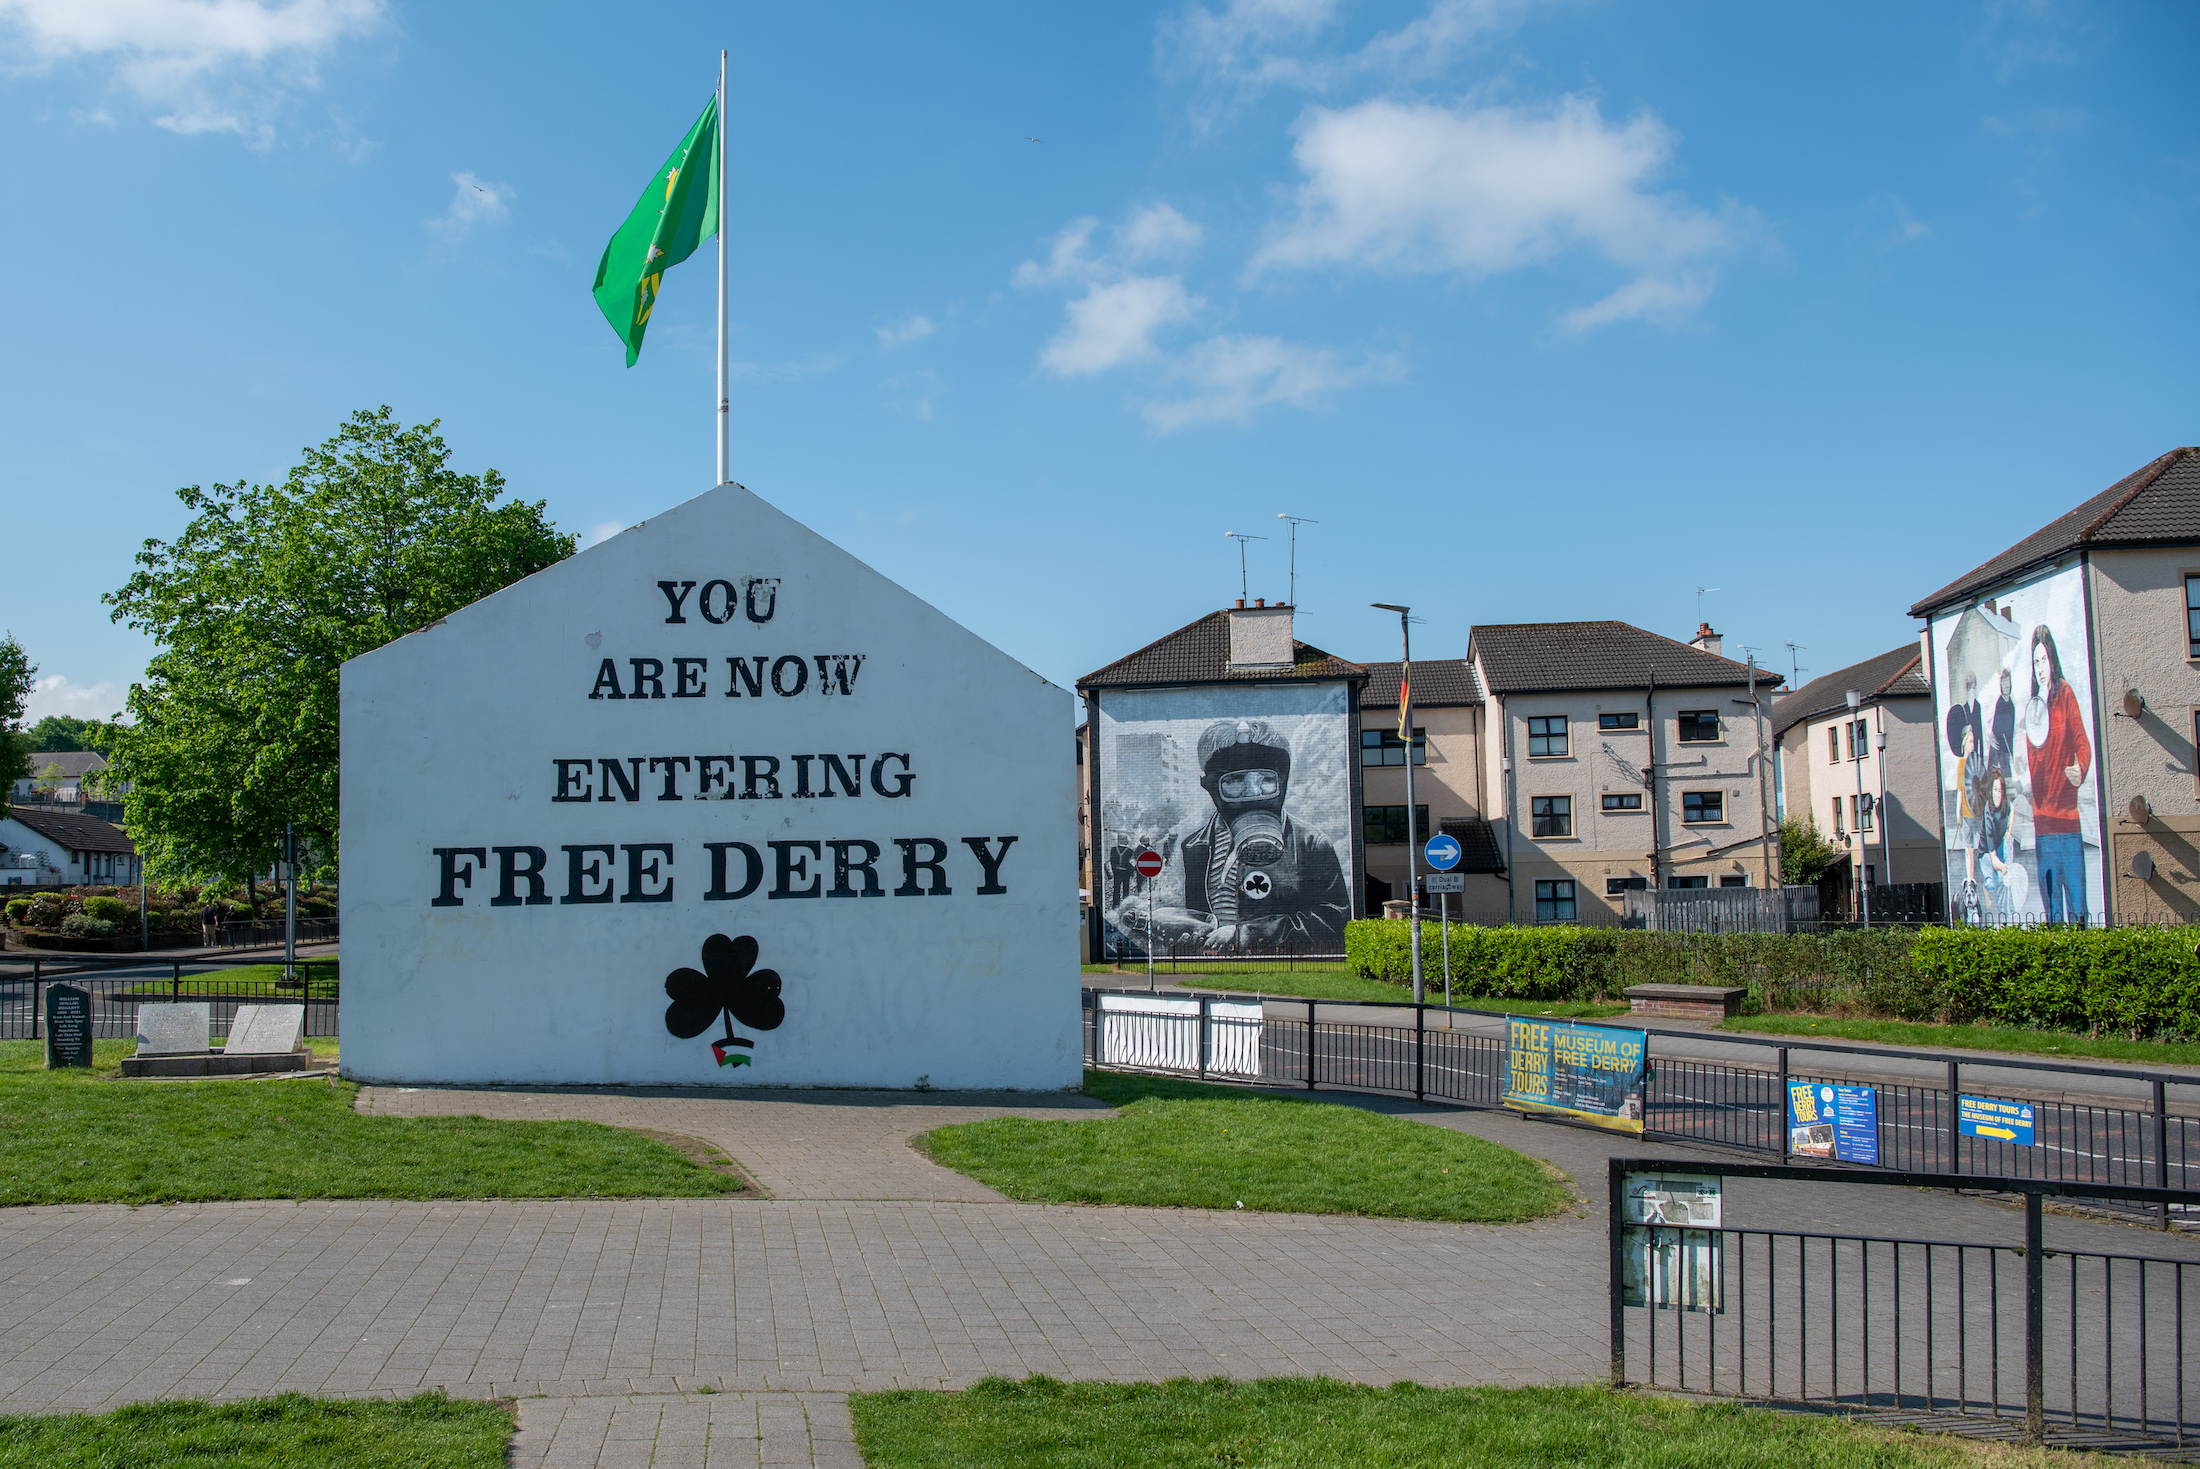 You are now entering Free Derry